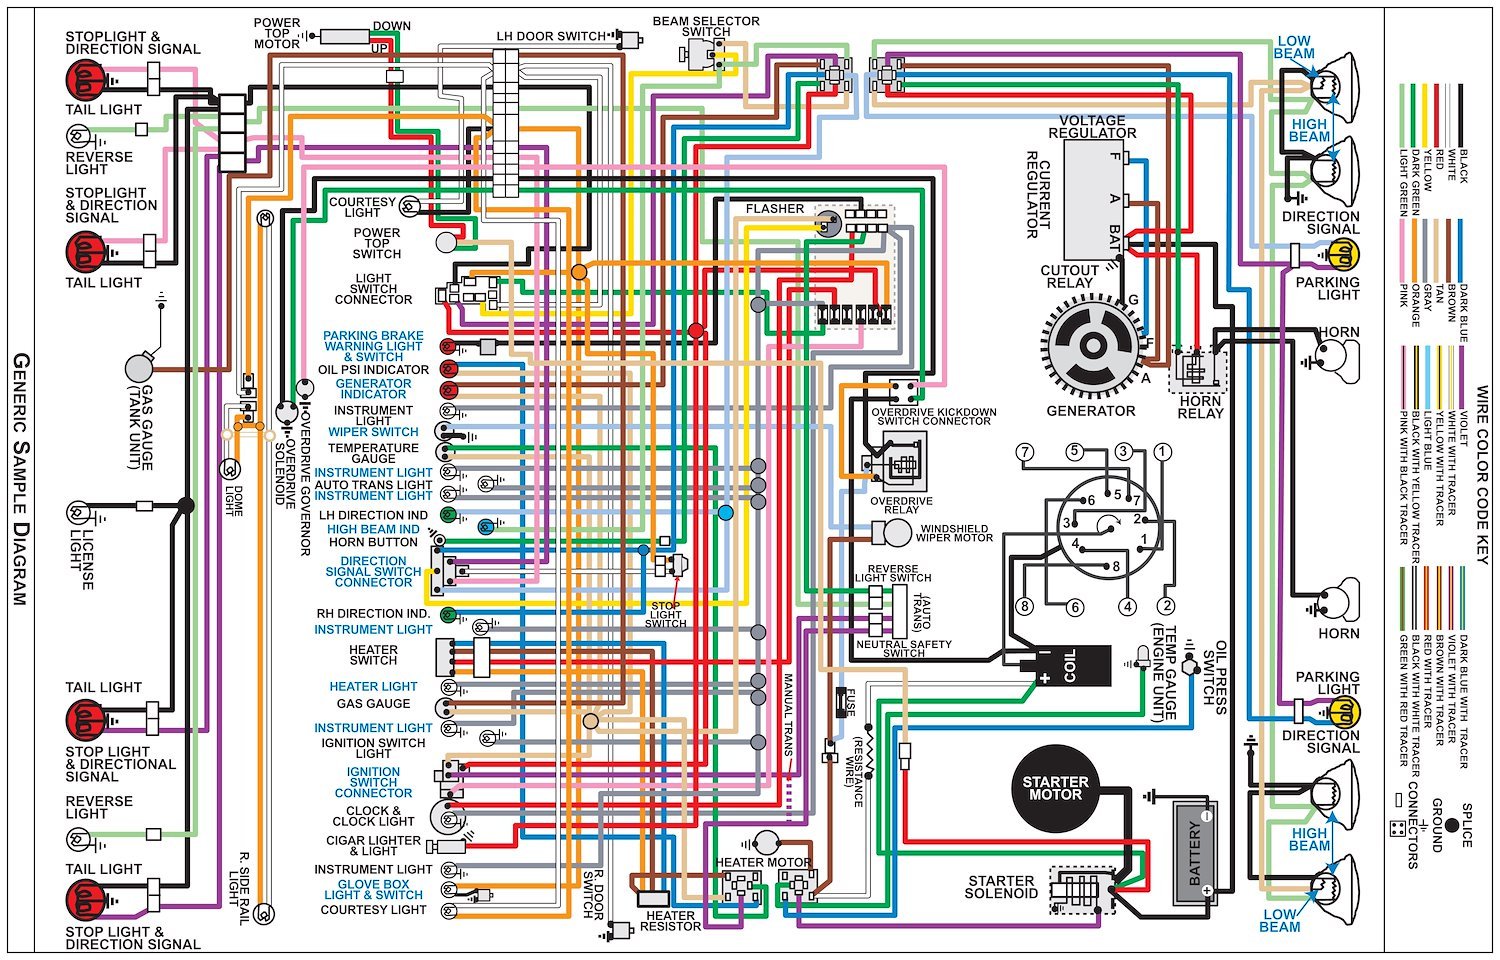 Wiring Diagram for 1967 Ford Fairlane, 11 in x 17 in., Laminated